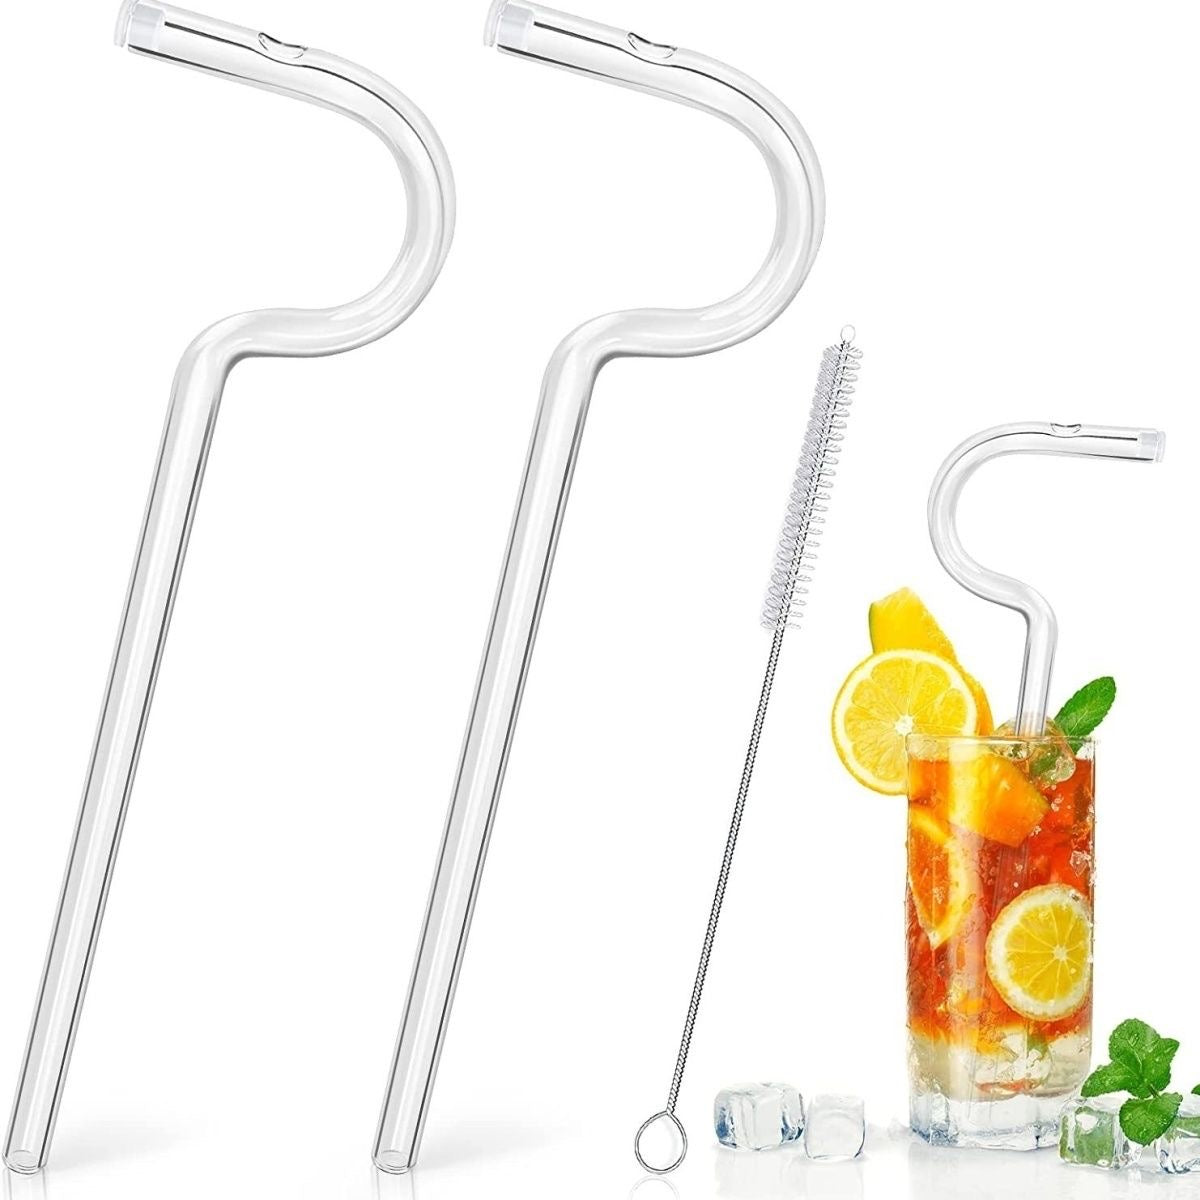 Anti Wrinkle Straw 2pcs Reusable Glass Straw For Cup Anti Wrinkle Drinking